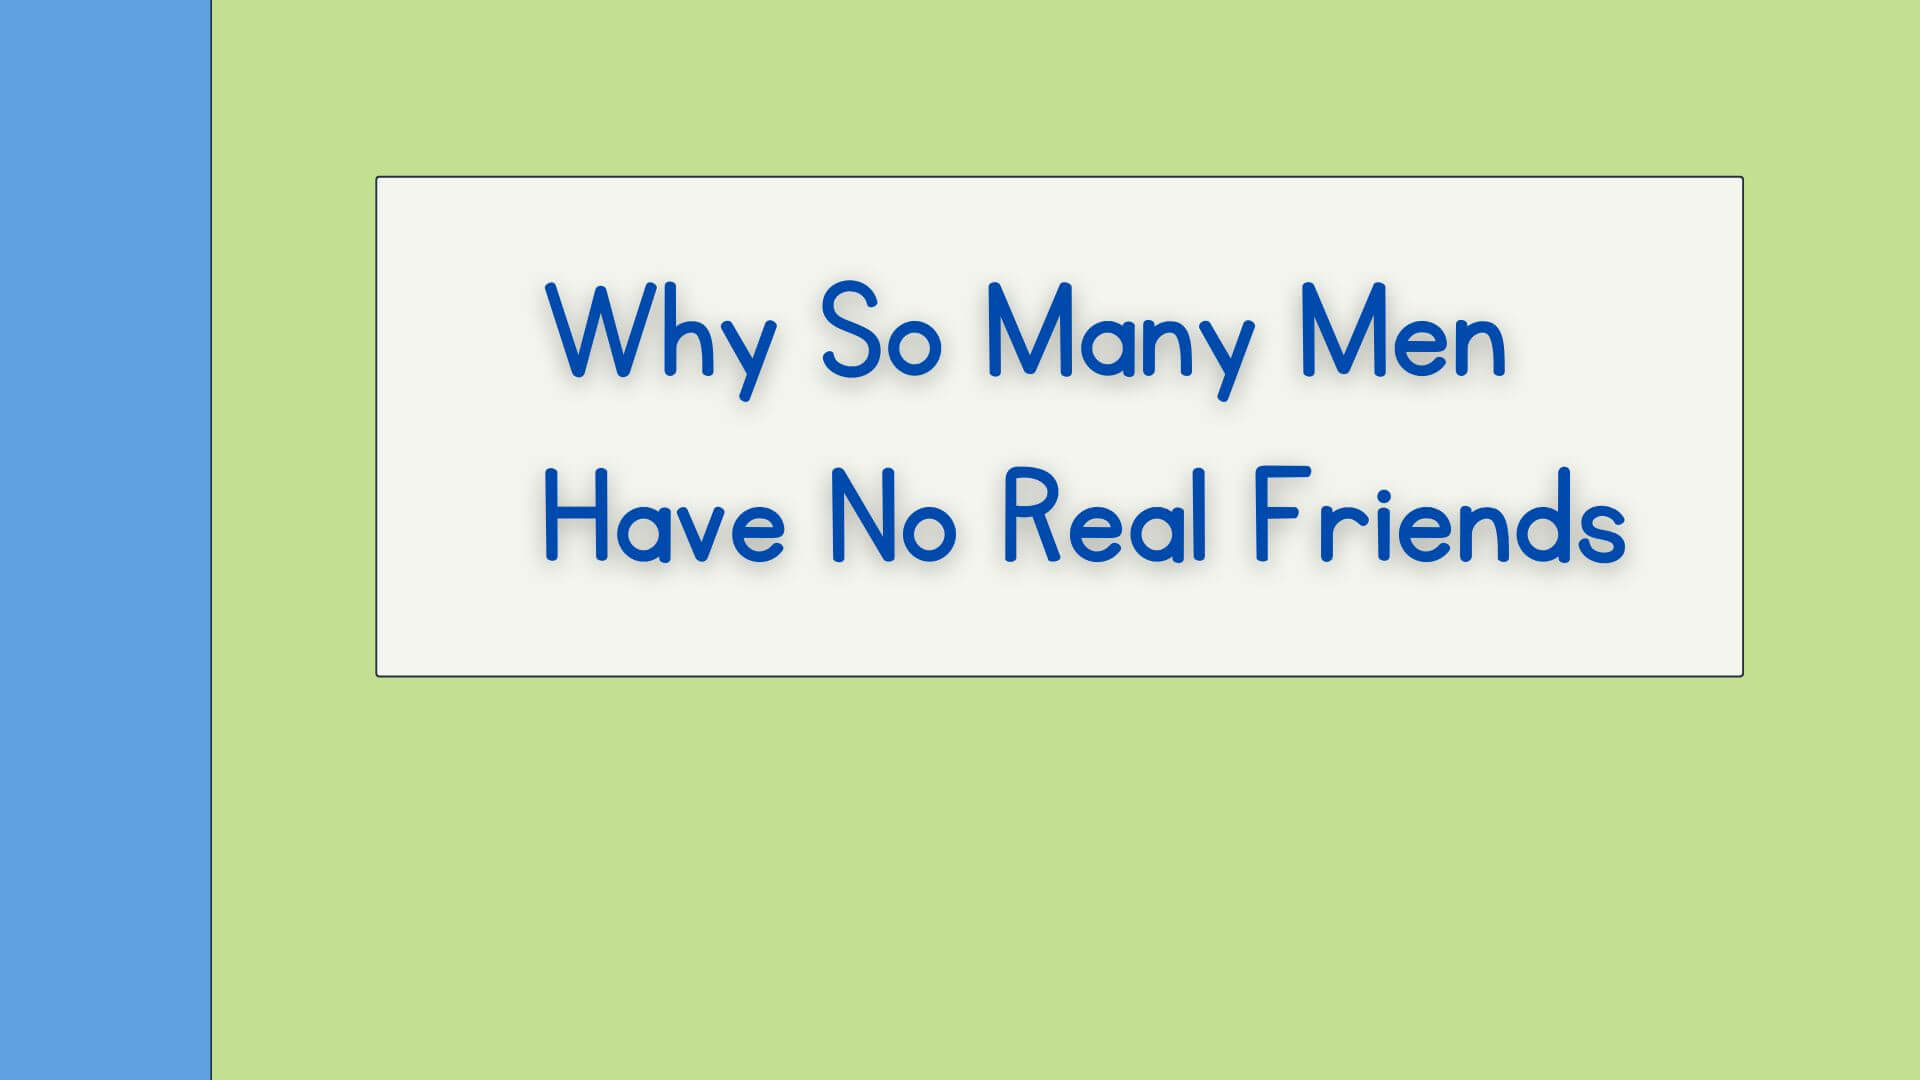 Why So Many Men Have No Real Friends